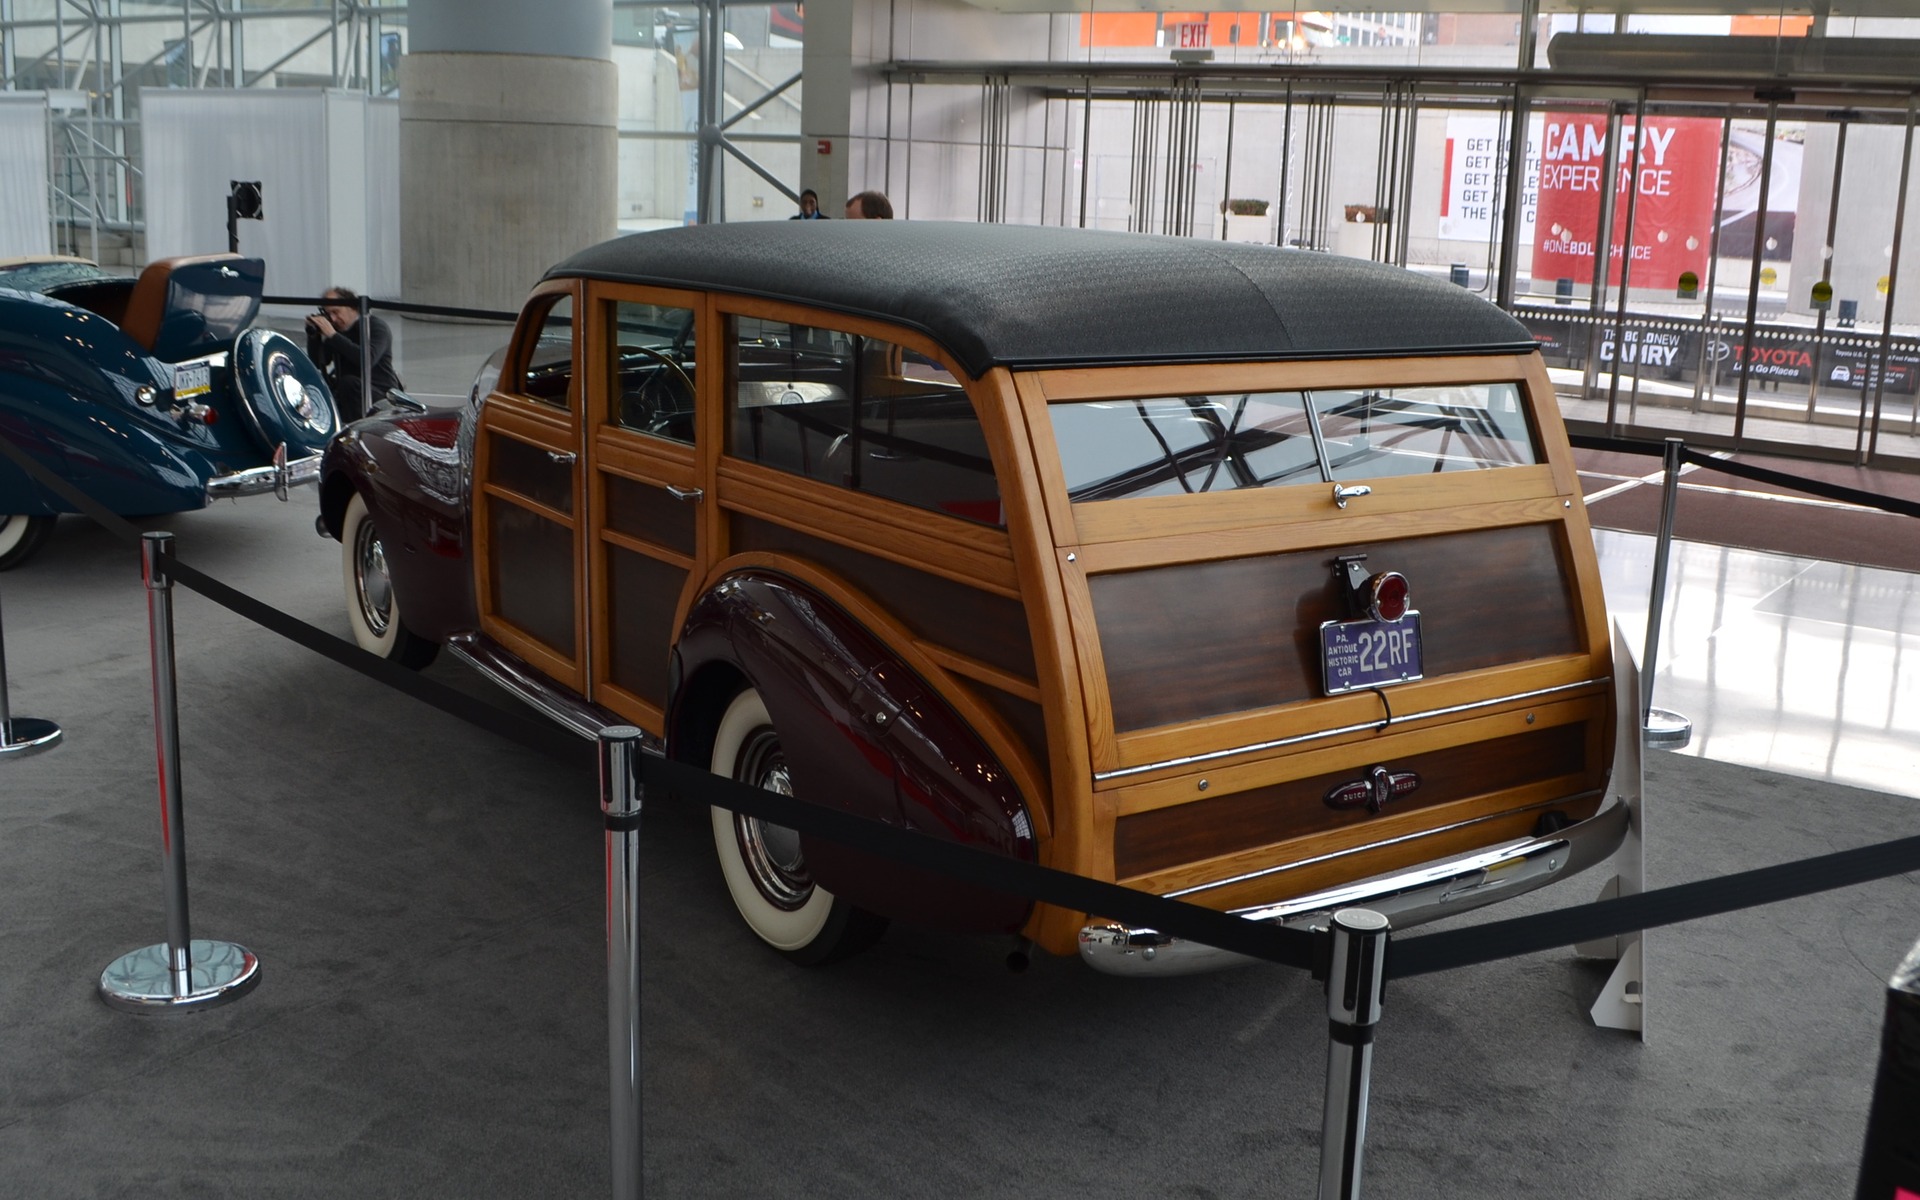 1940 Buick Super Estate Wagon. Yes, it's real wood!